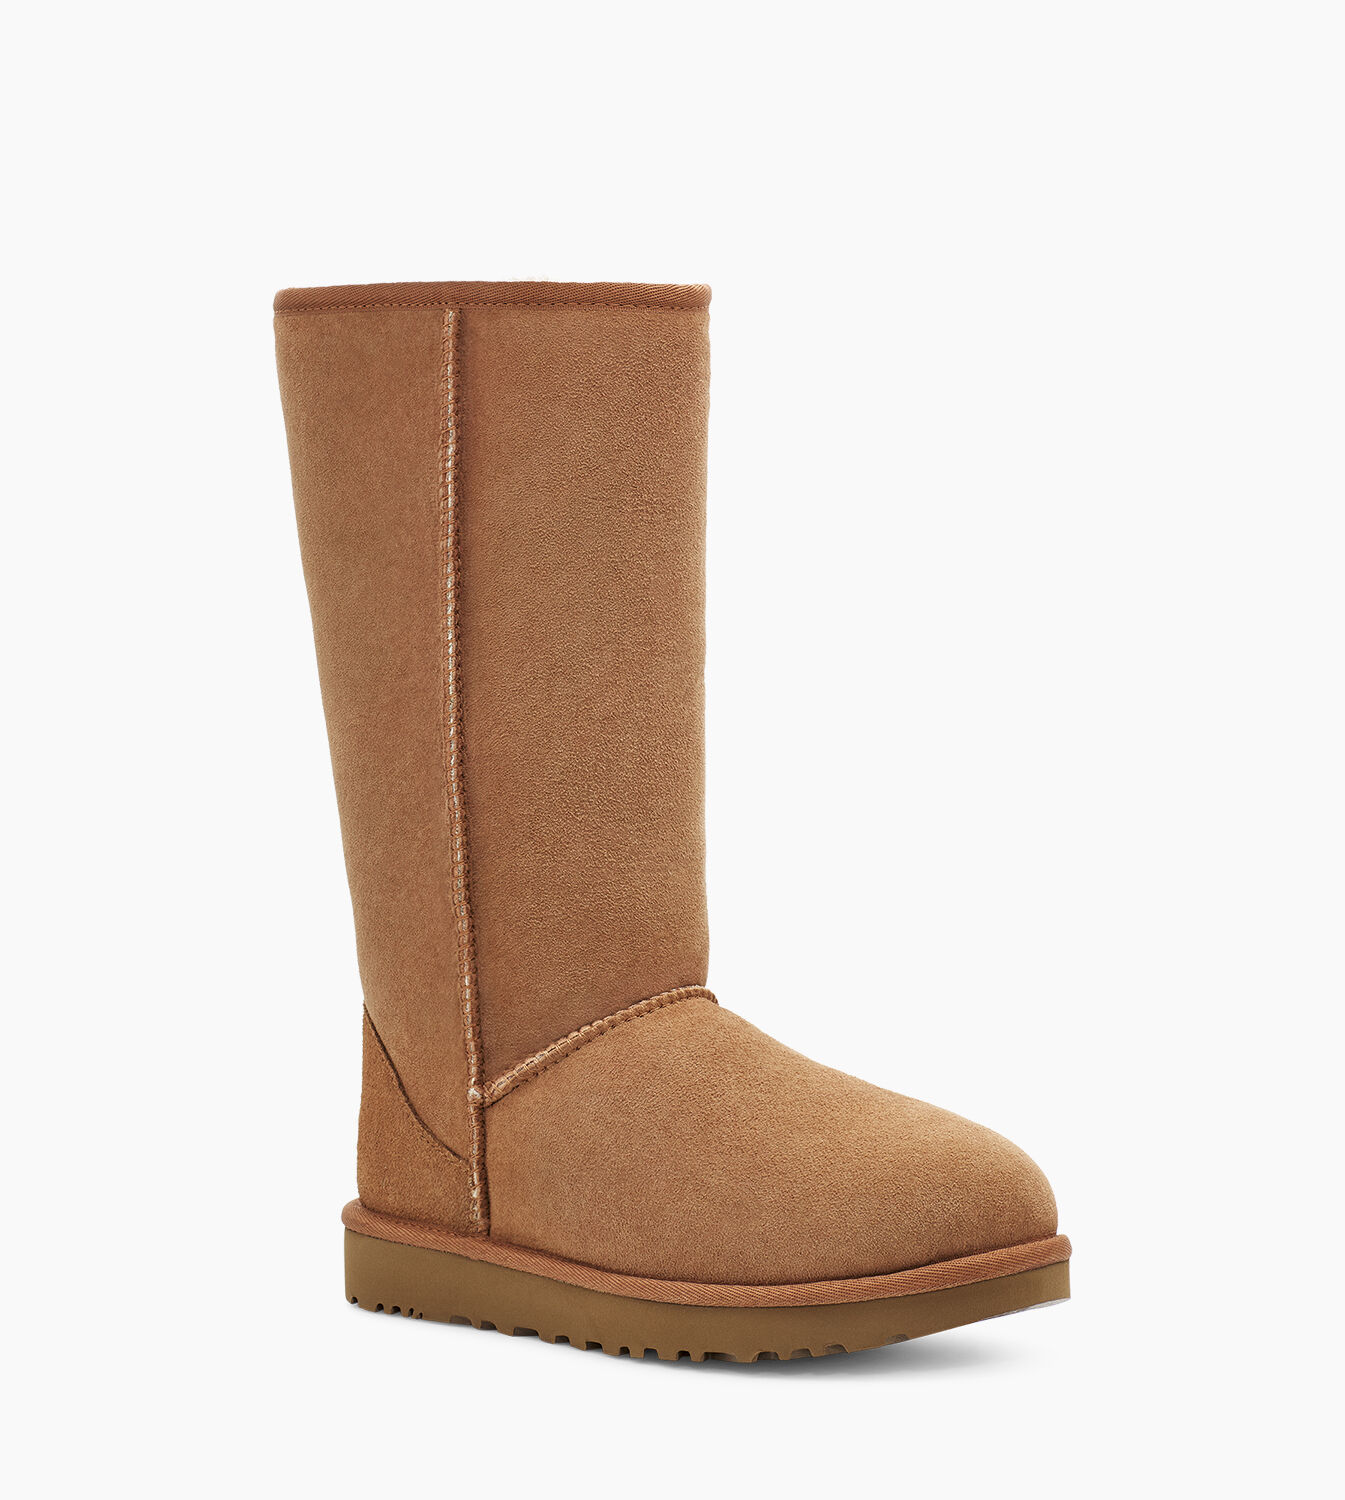 uggs boots cheap